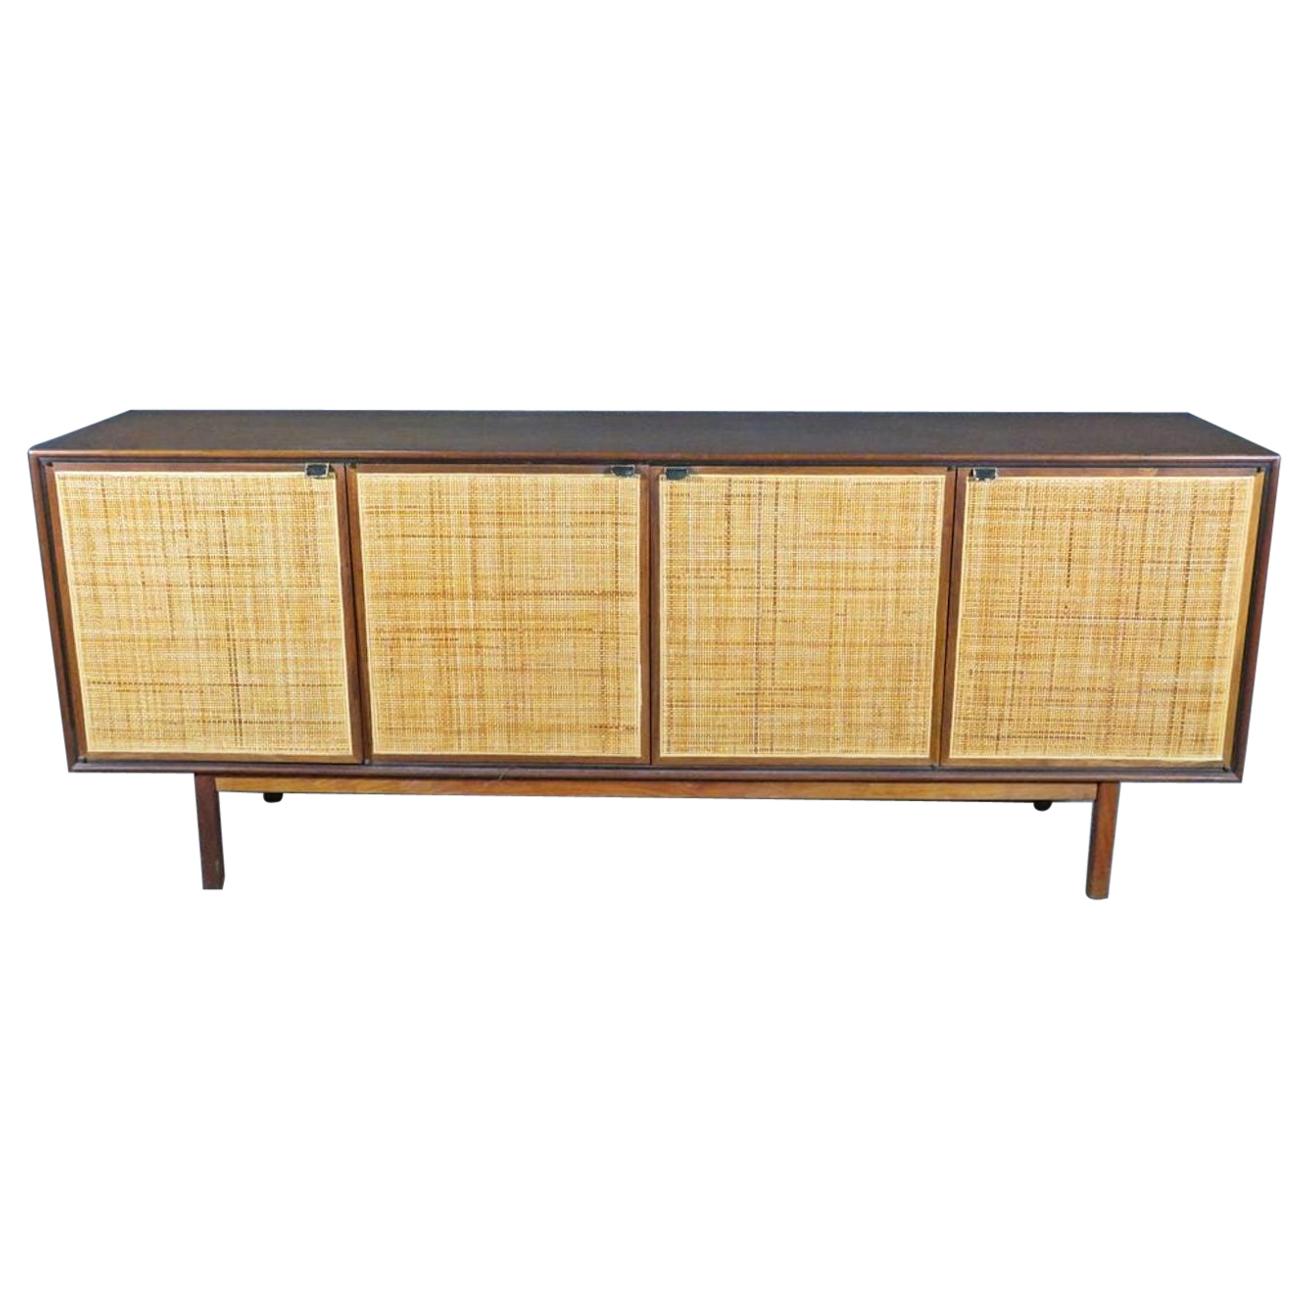 Vintage Credenza in Walnut and Cane